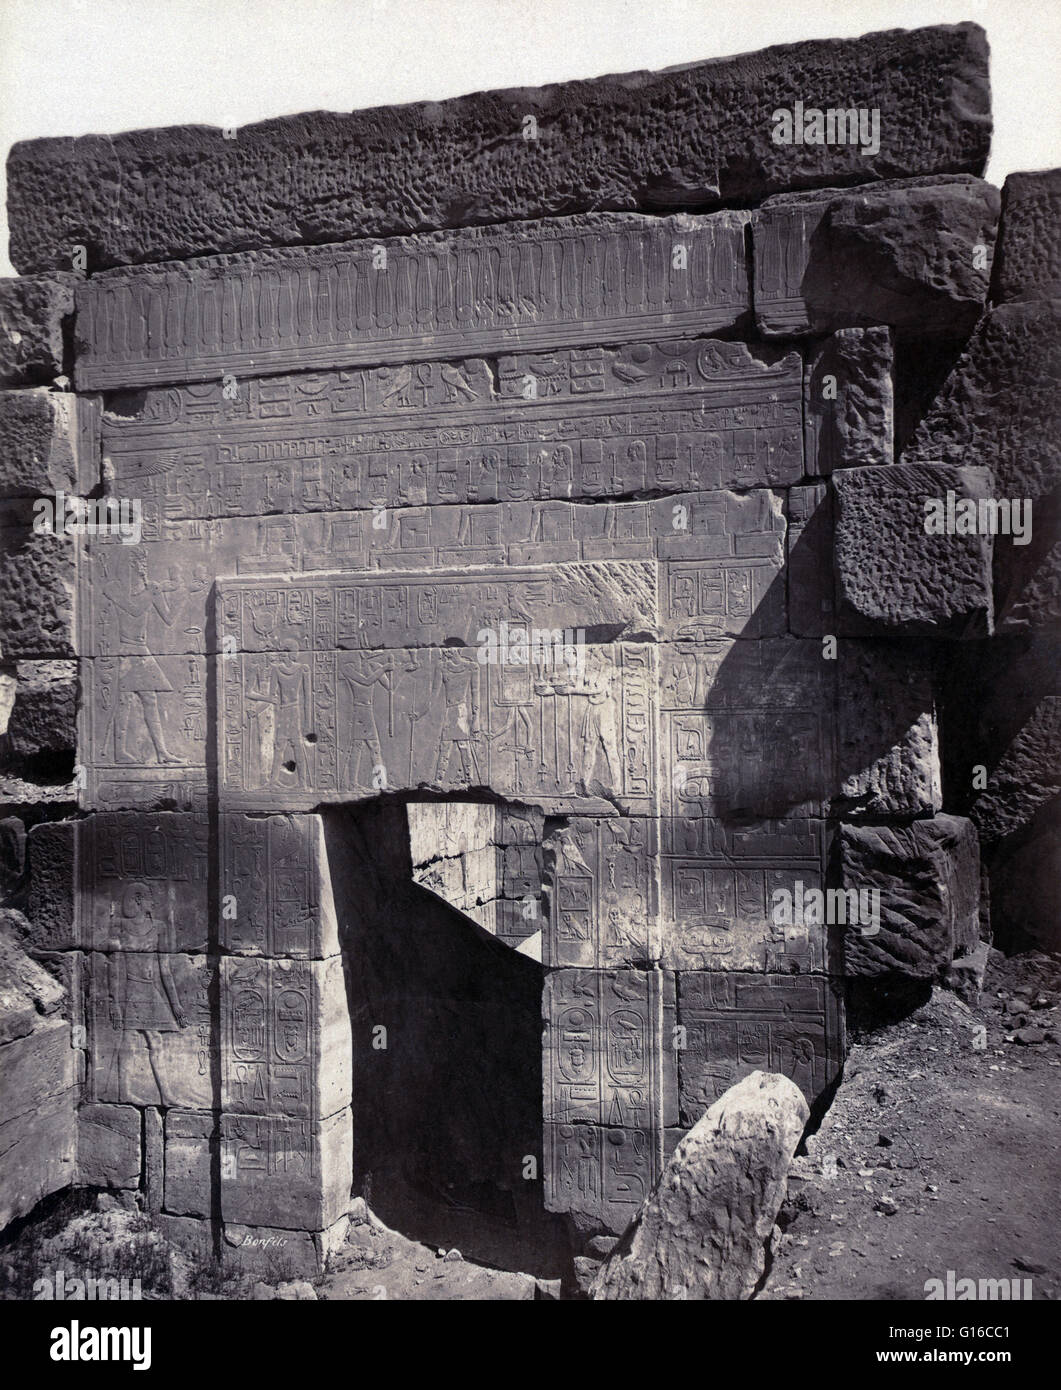 Entrance to sanctuary of the Temple of Thutmose III, Thebes, photographed by Maison Bonfils, circa 1867-1885. The Temple of Thutmose III at Deir el-bahari was dedicated primarily to the god Amun, both in the form of Amun-Re and Amun-Kamutef, and probably Stock Photo